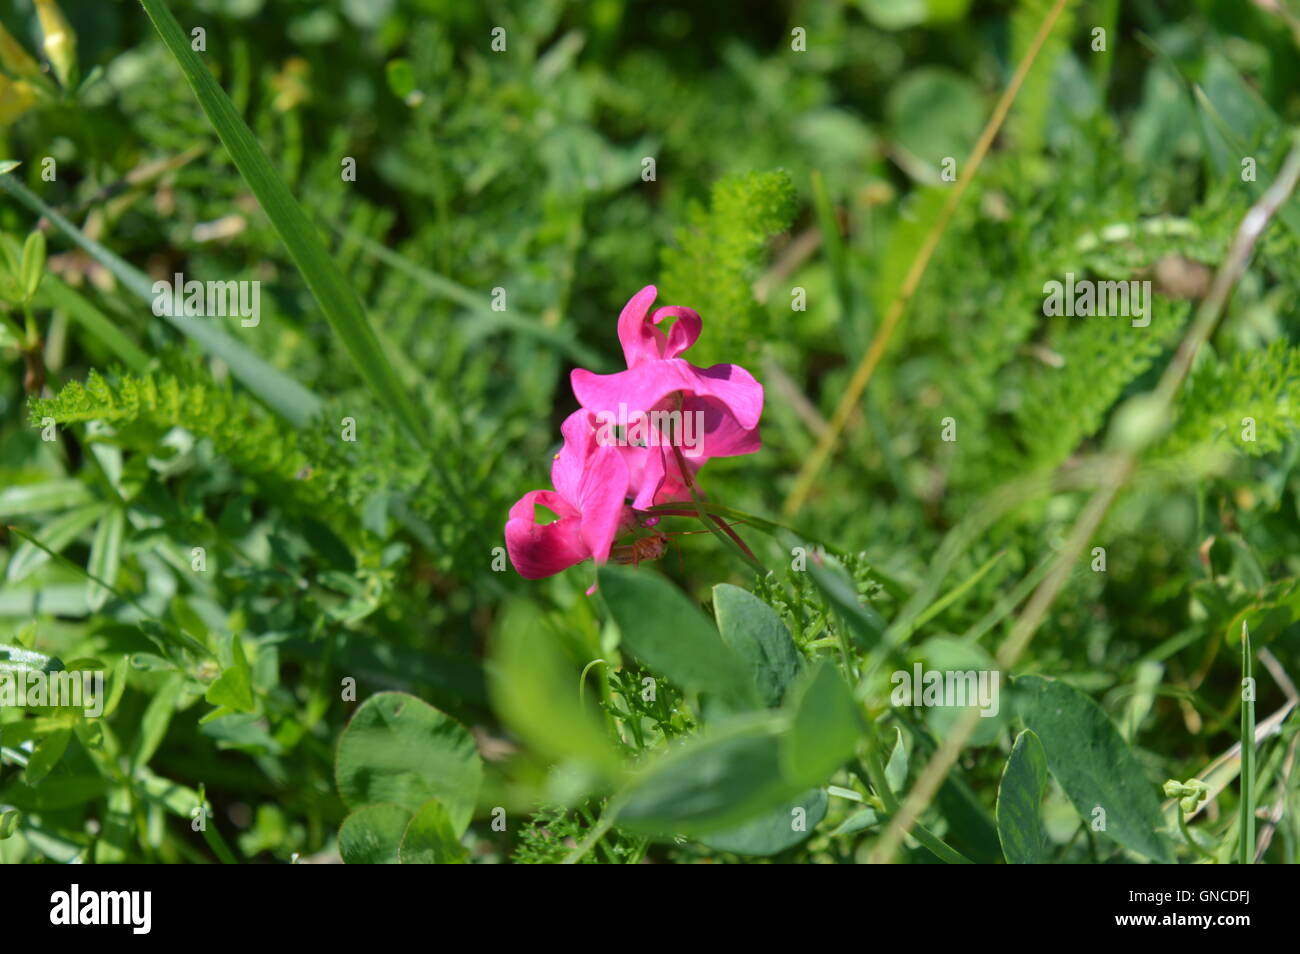 Snapdragon flower in a field Stock Photo